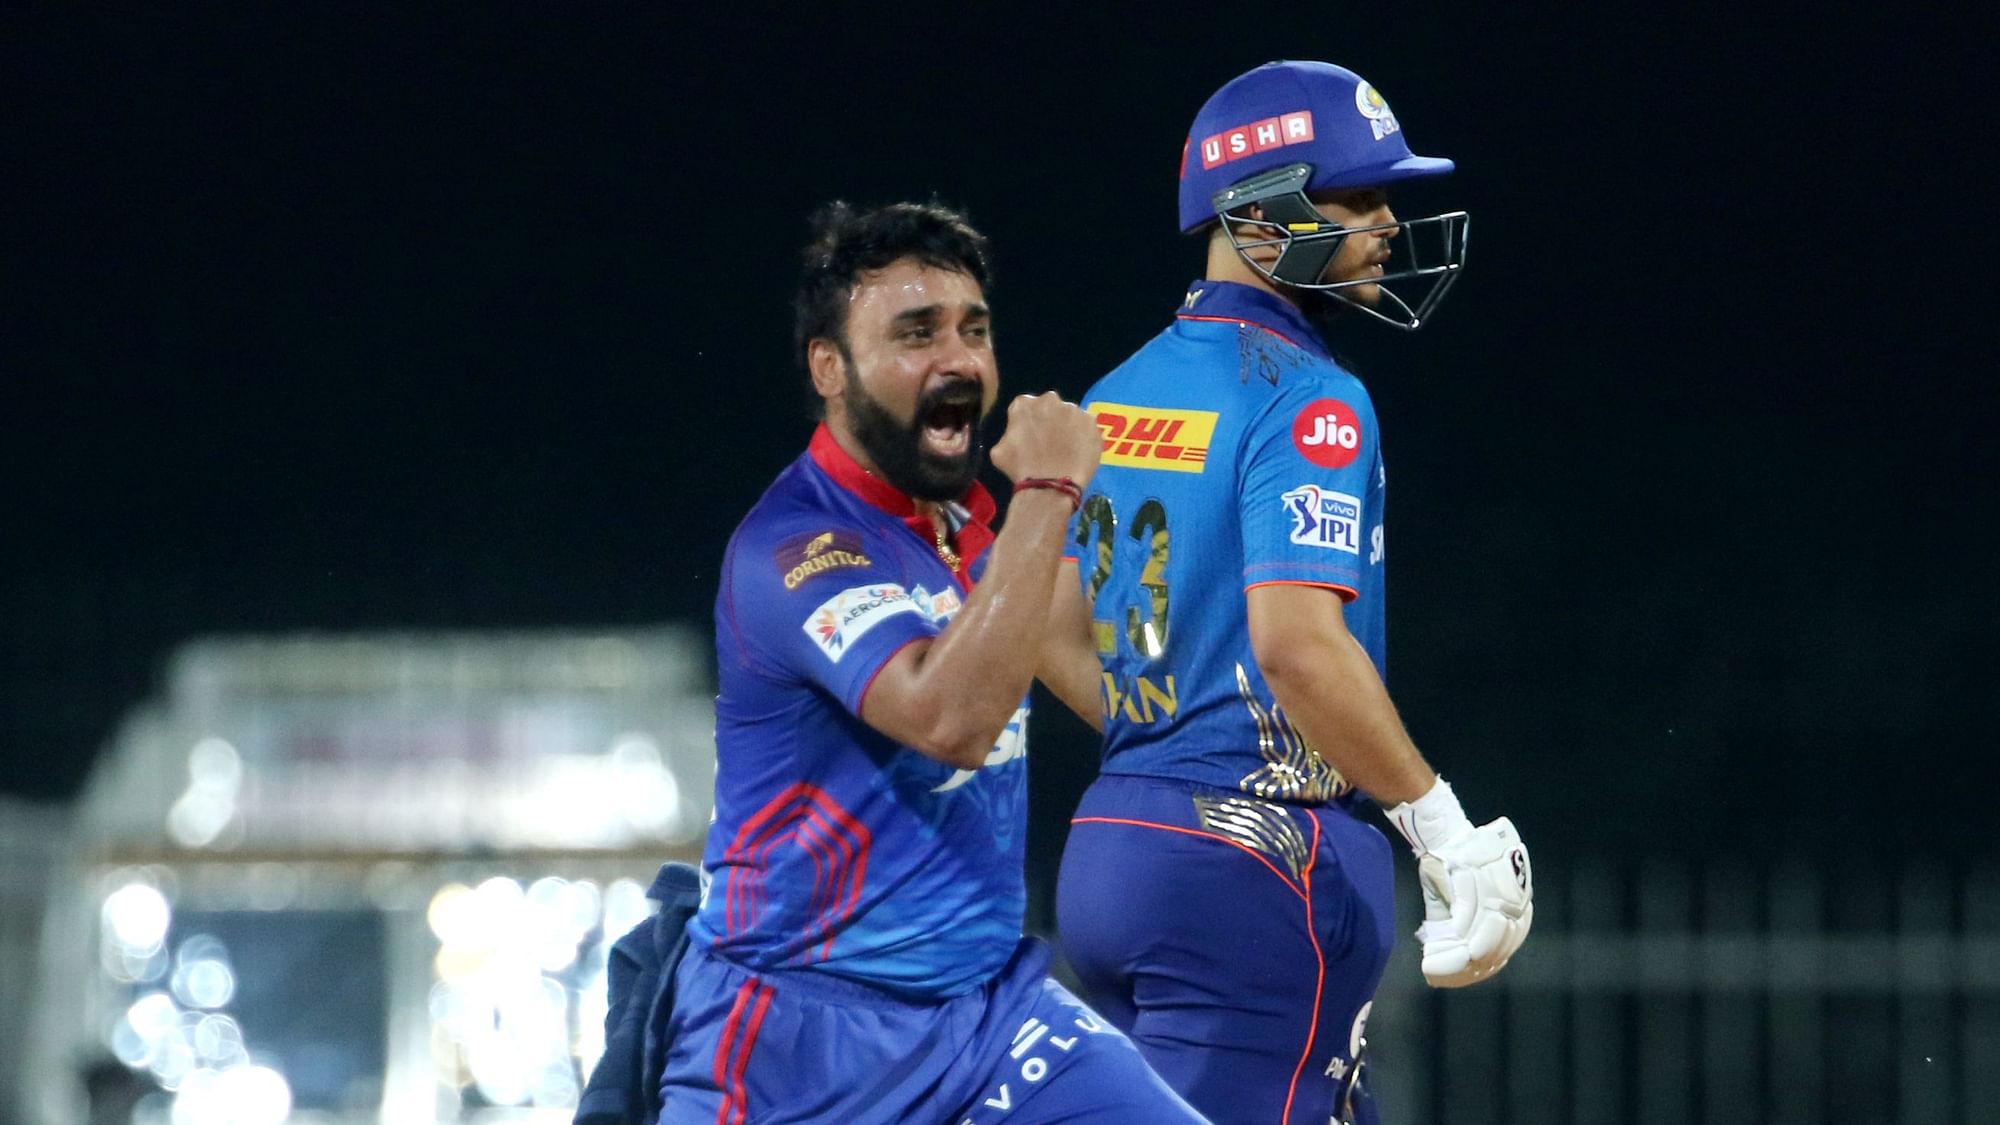 Defending champions Mumbai Indians have been restricted to 137/9 by Delhi Capitals.